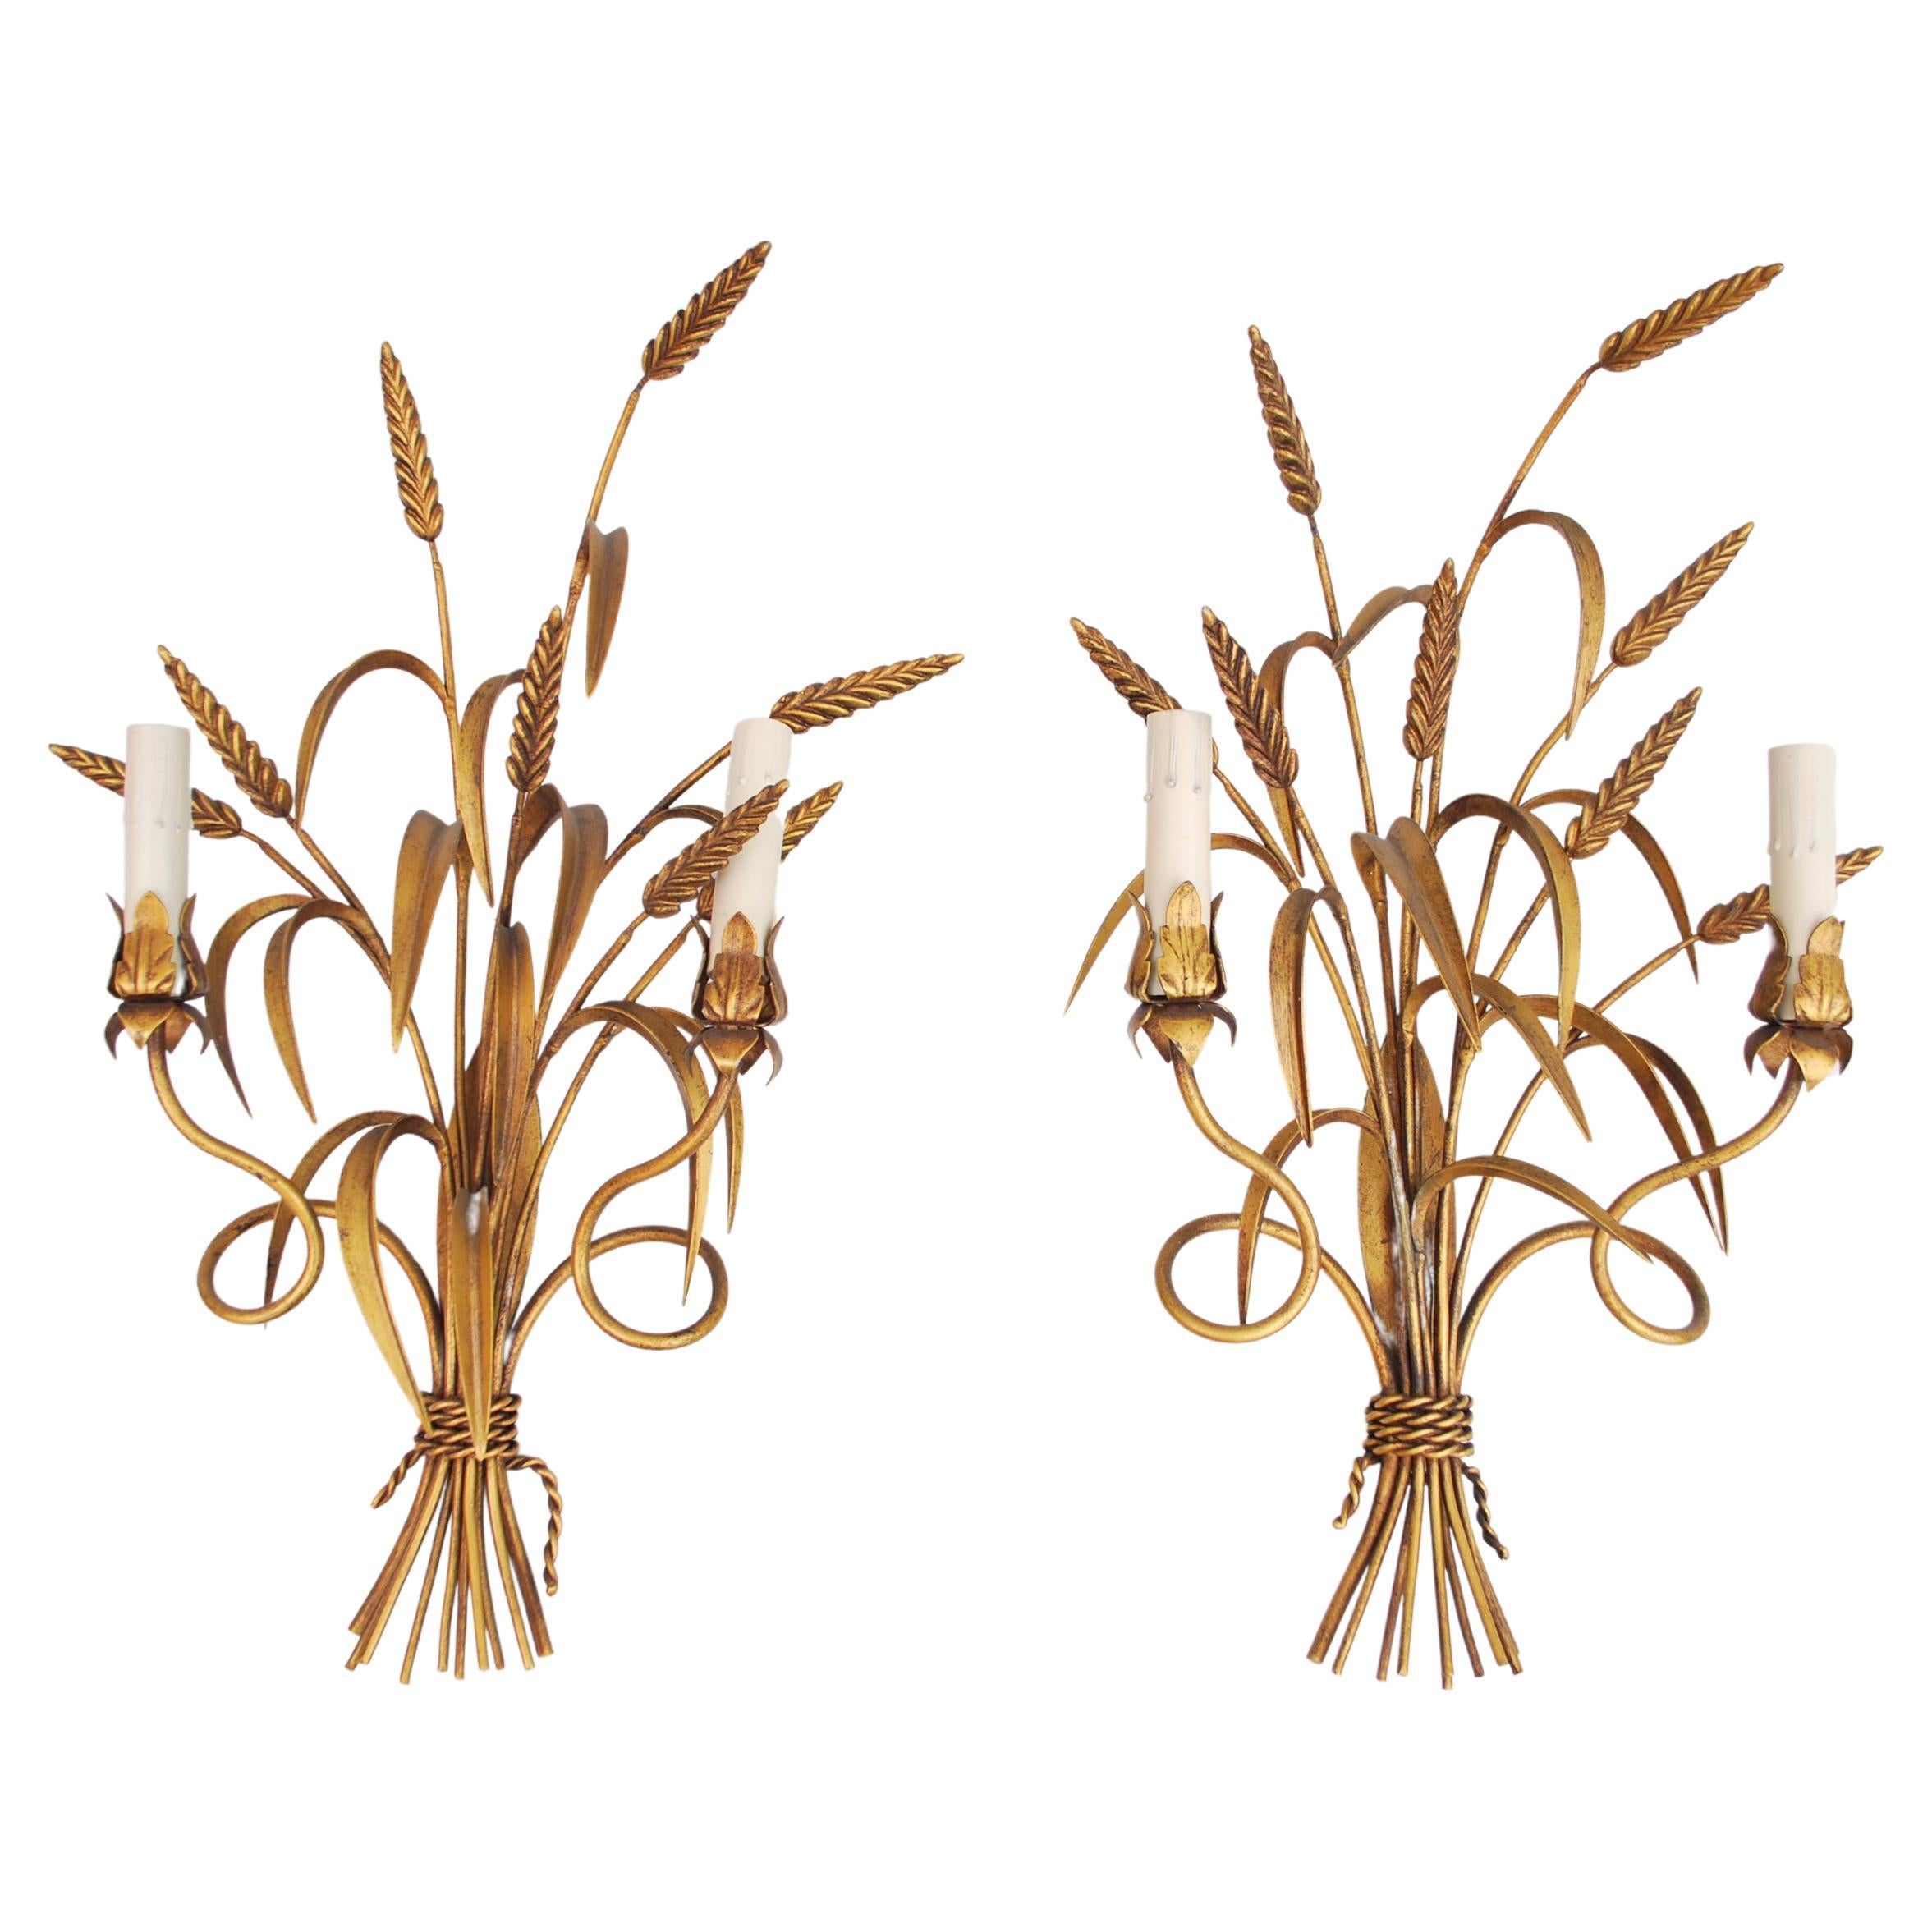 Pair of 1950s Italian Wheat Sheaf Sconces For Sale